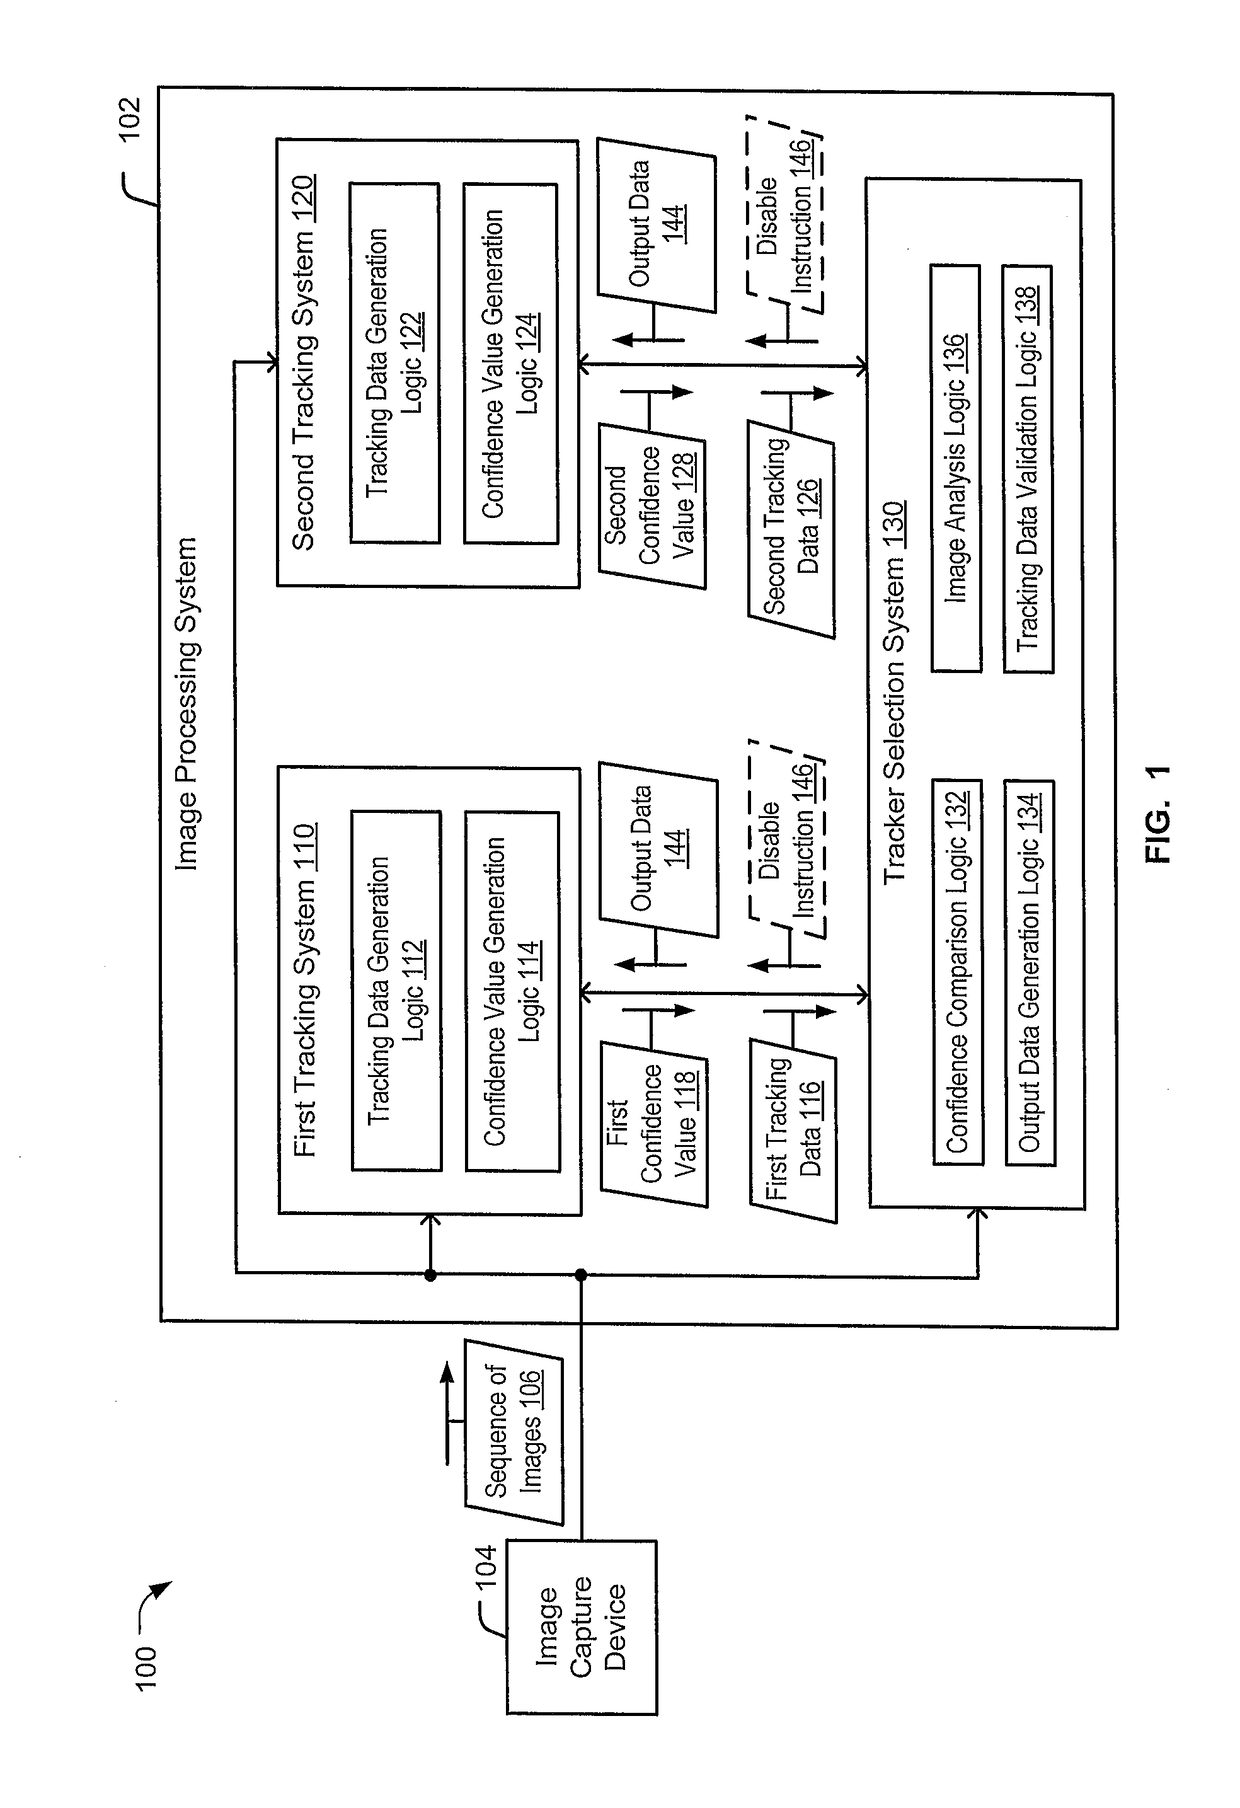 System and method to improve object tracking using multiple tracking systems